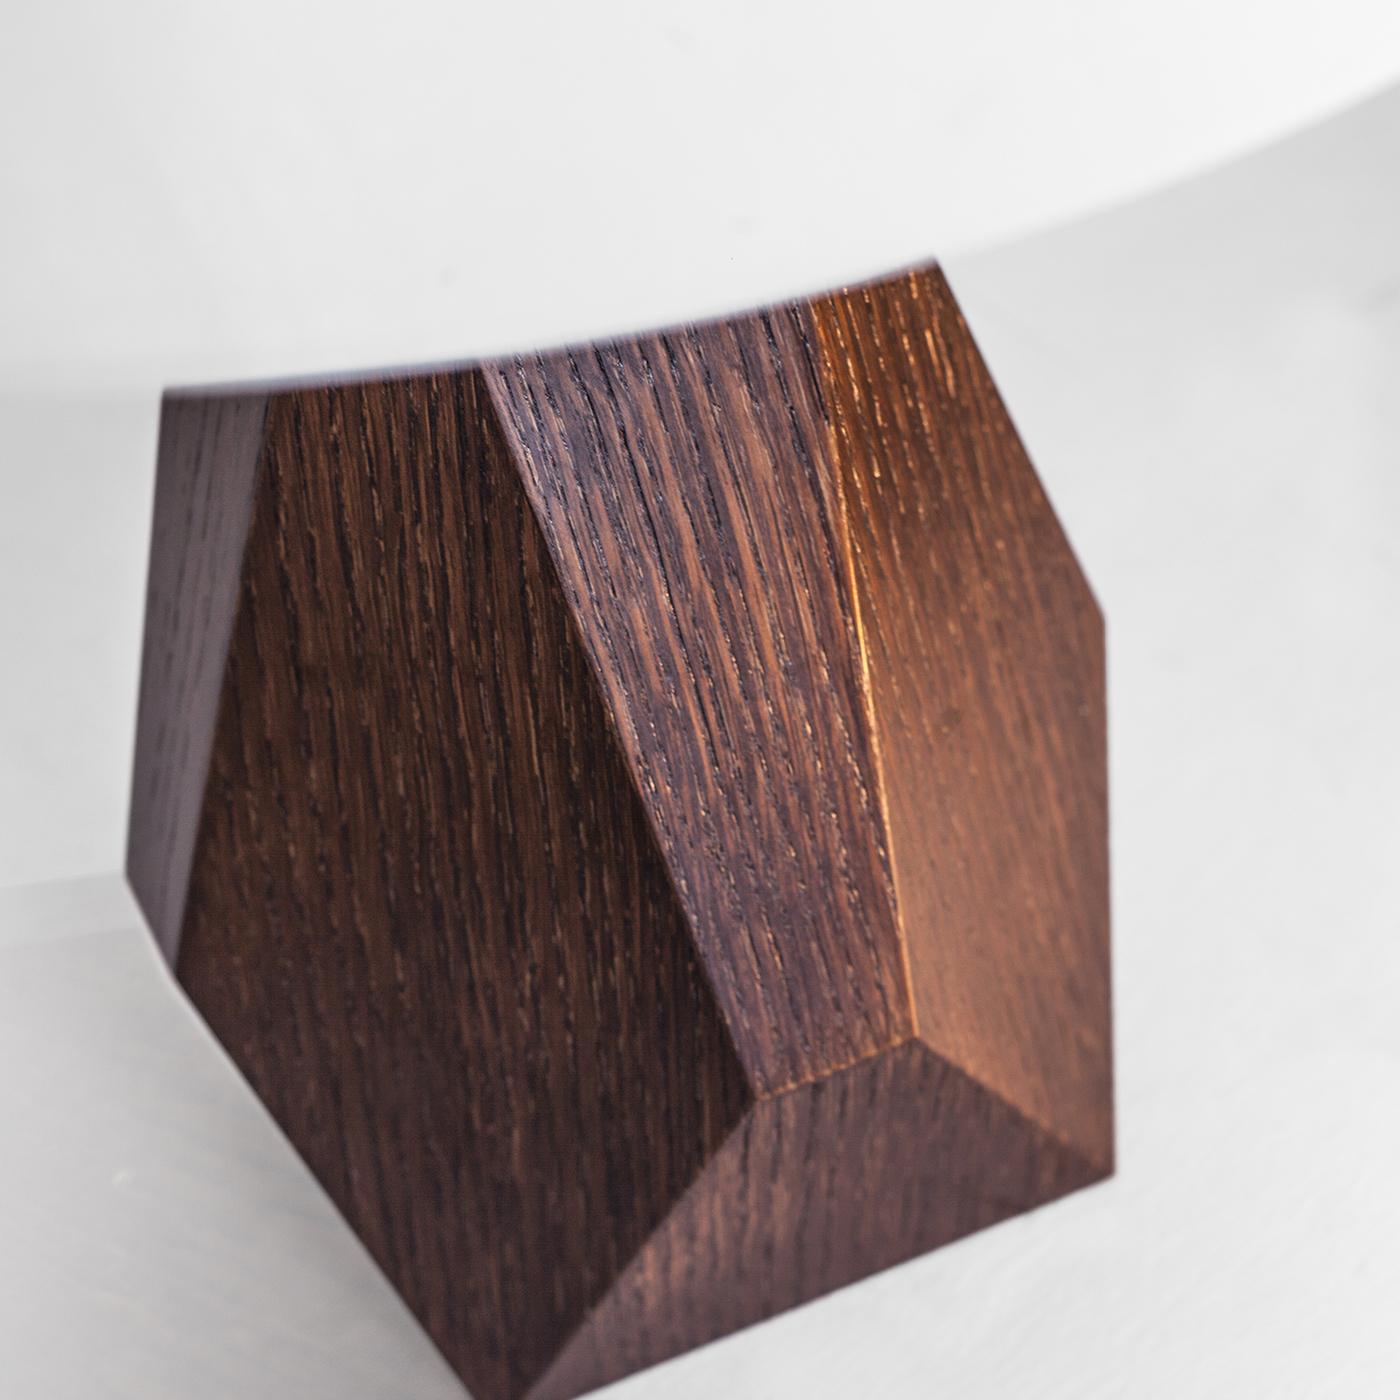 Gea table lamp has an oak structure with shellac finishing, while the metallic parts are in polished brass; the lampshade is in textile. The structure is also available in maple with polished black finishing. Its particular shape makes this lamp a